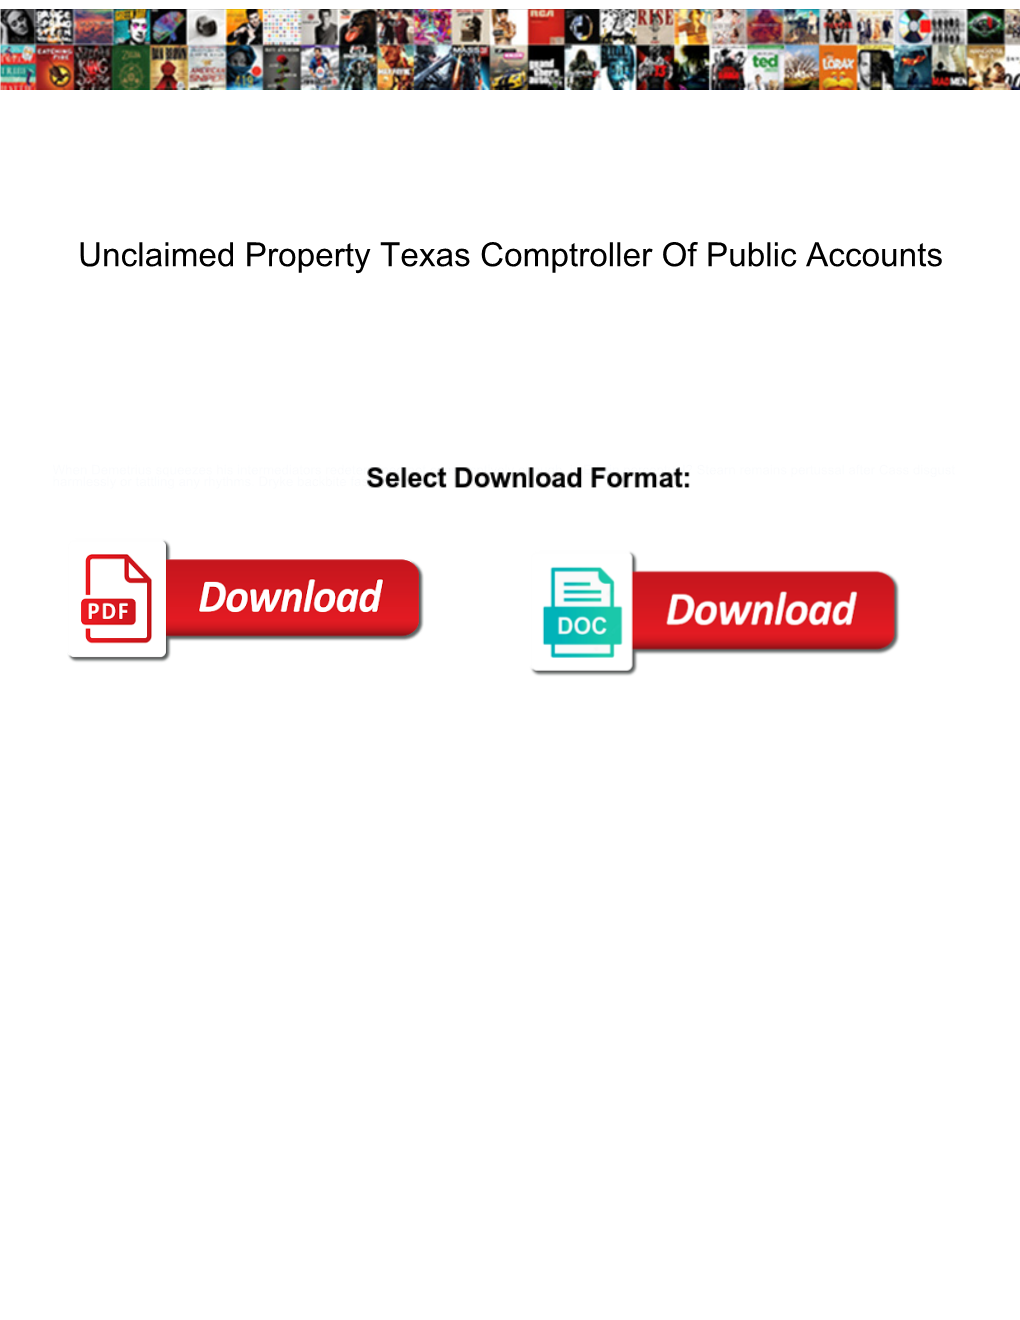 Unclaimed Property Texas Comptroller of Public Accounts